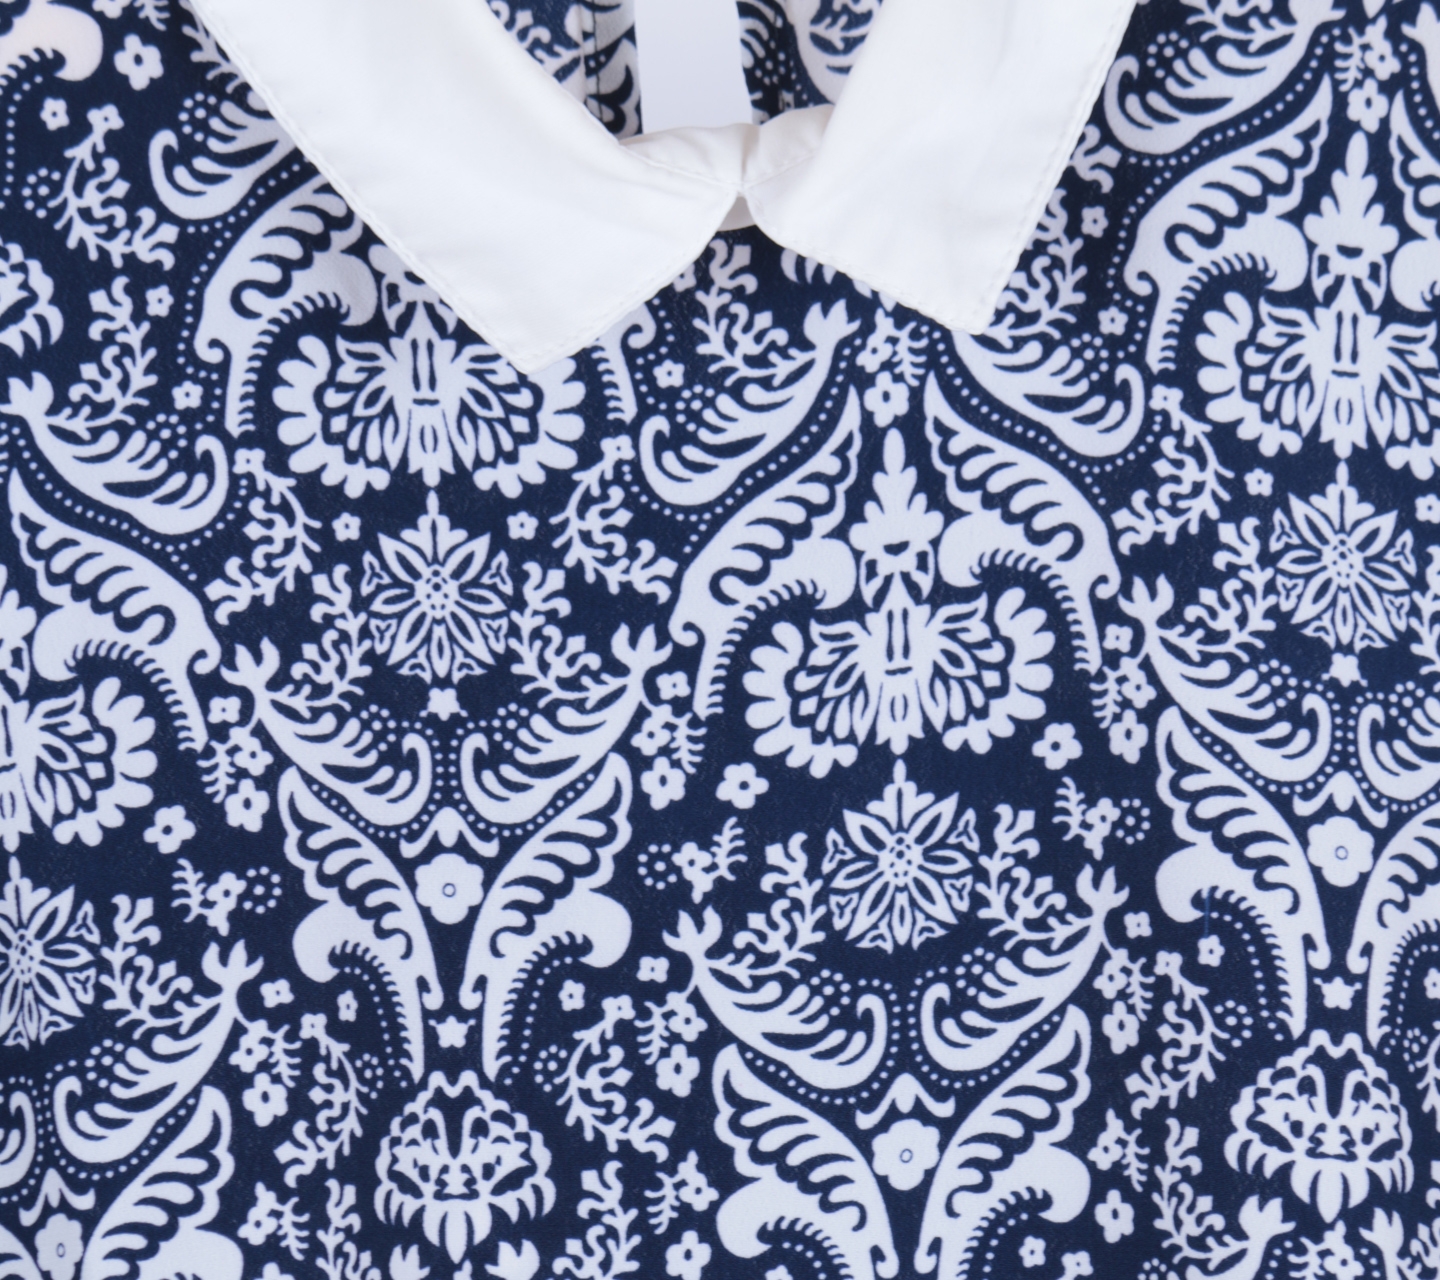  Blue And White Combi Shirt